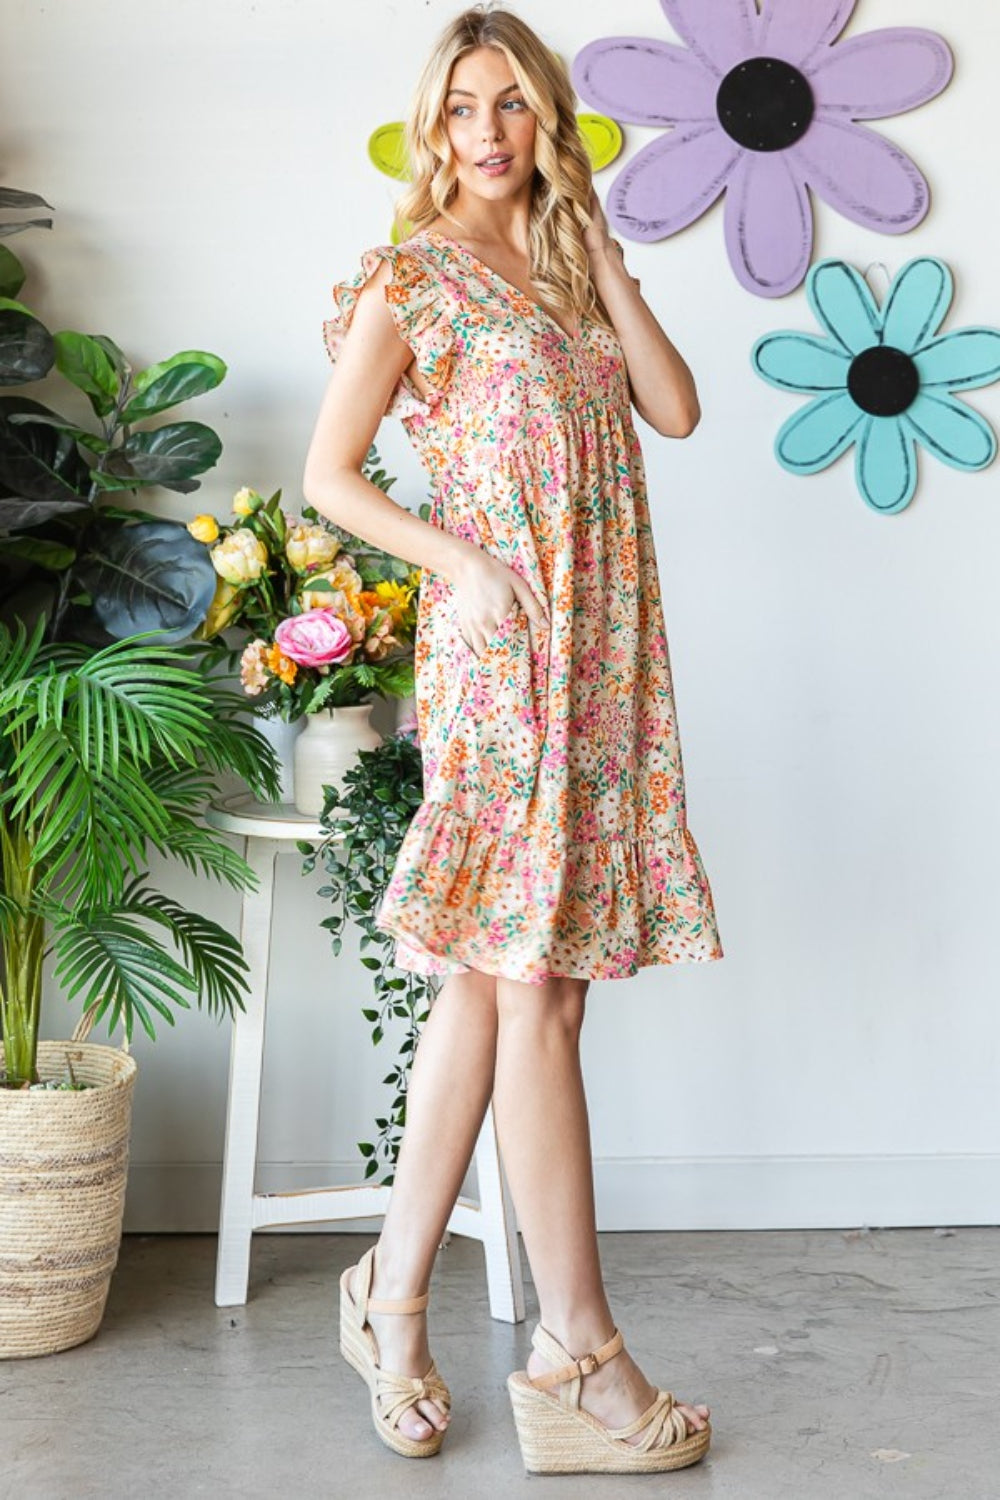 Introducing the Floral Ruffled V-Neck Dress. This stunning dress combines feminine elegance with a touch of playfulness. The floral pattern adds a romantic and vibrant flair, while the ruffled details create a whimsical and graceful look. S  -3X